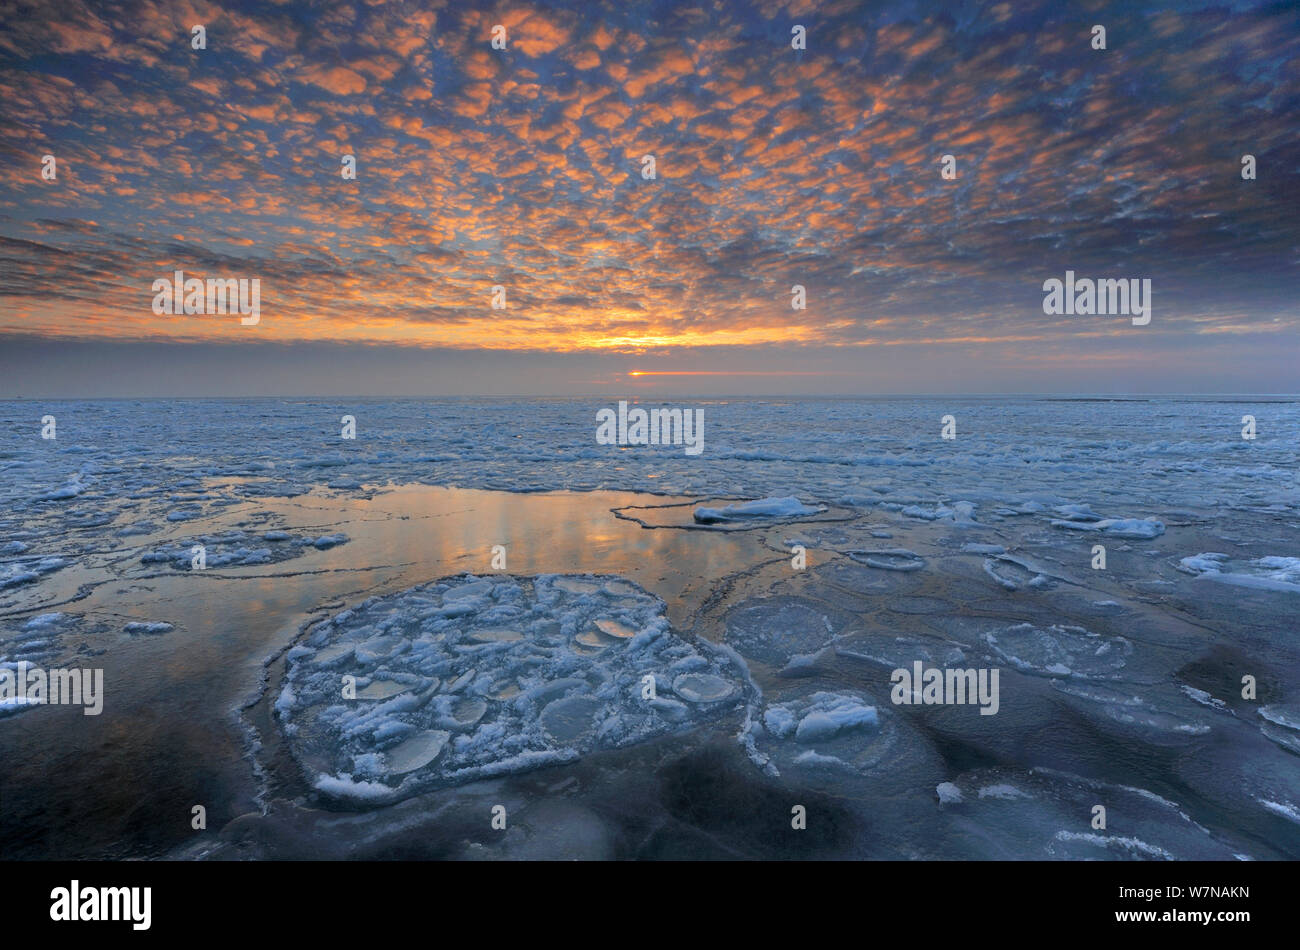 Ice formations on the Baltic Sea at sunrise, Jasmund National Park, Germany, February Stock Photo